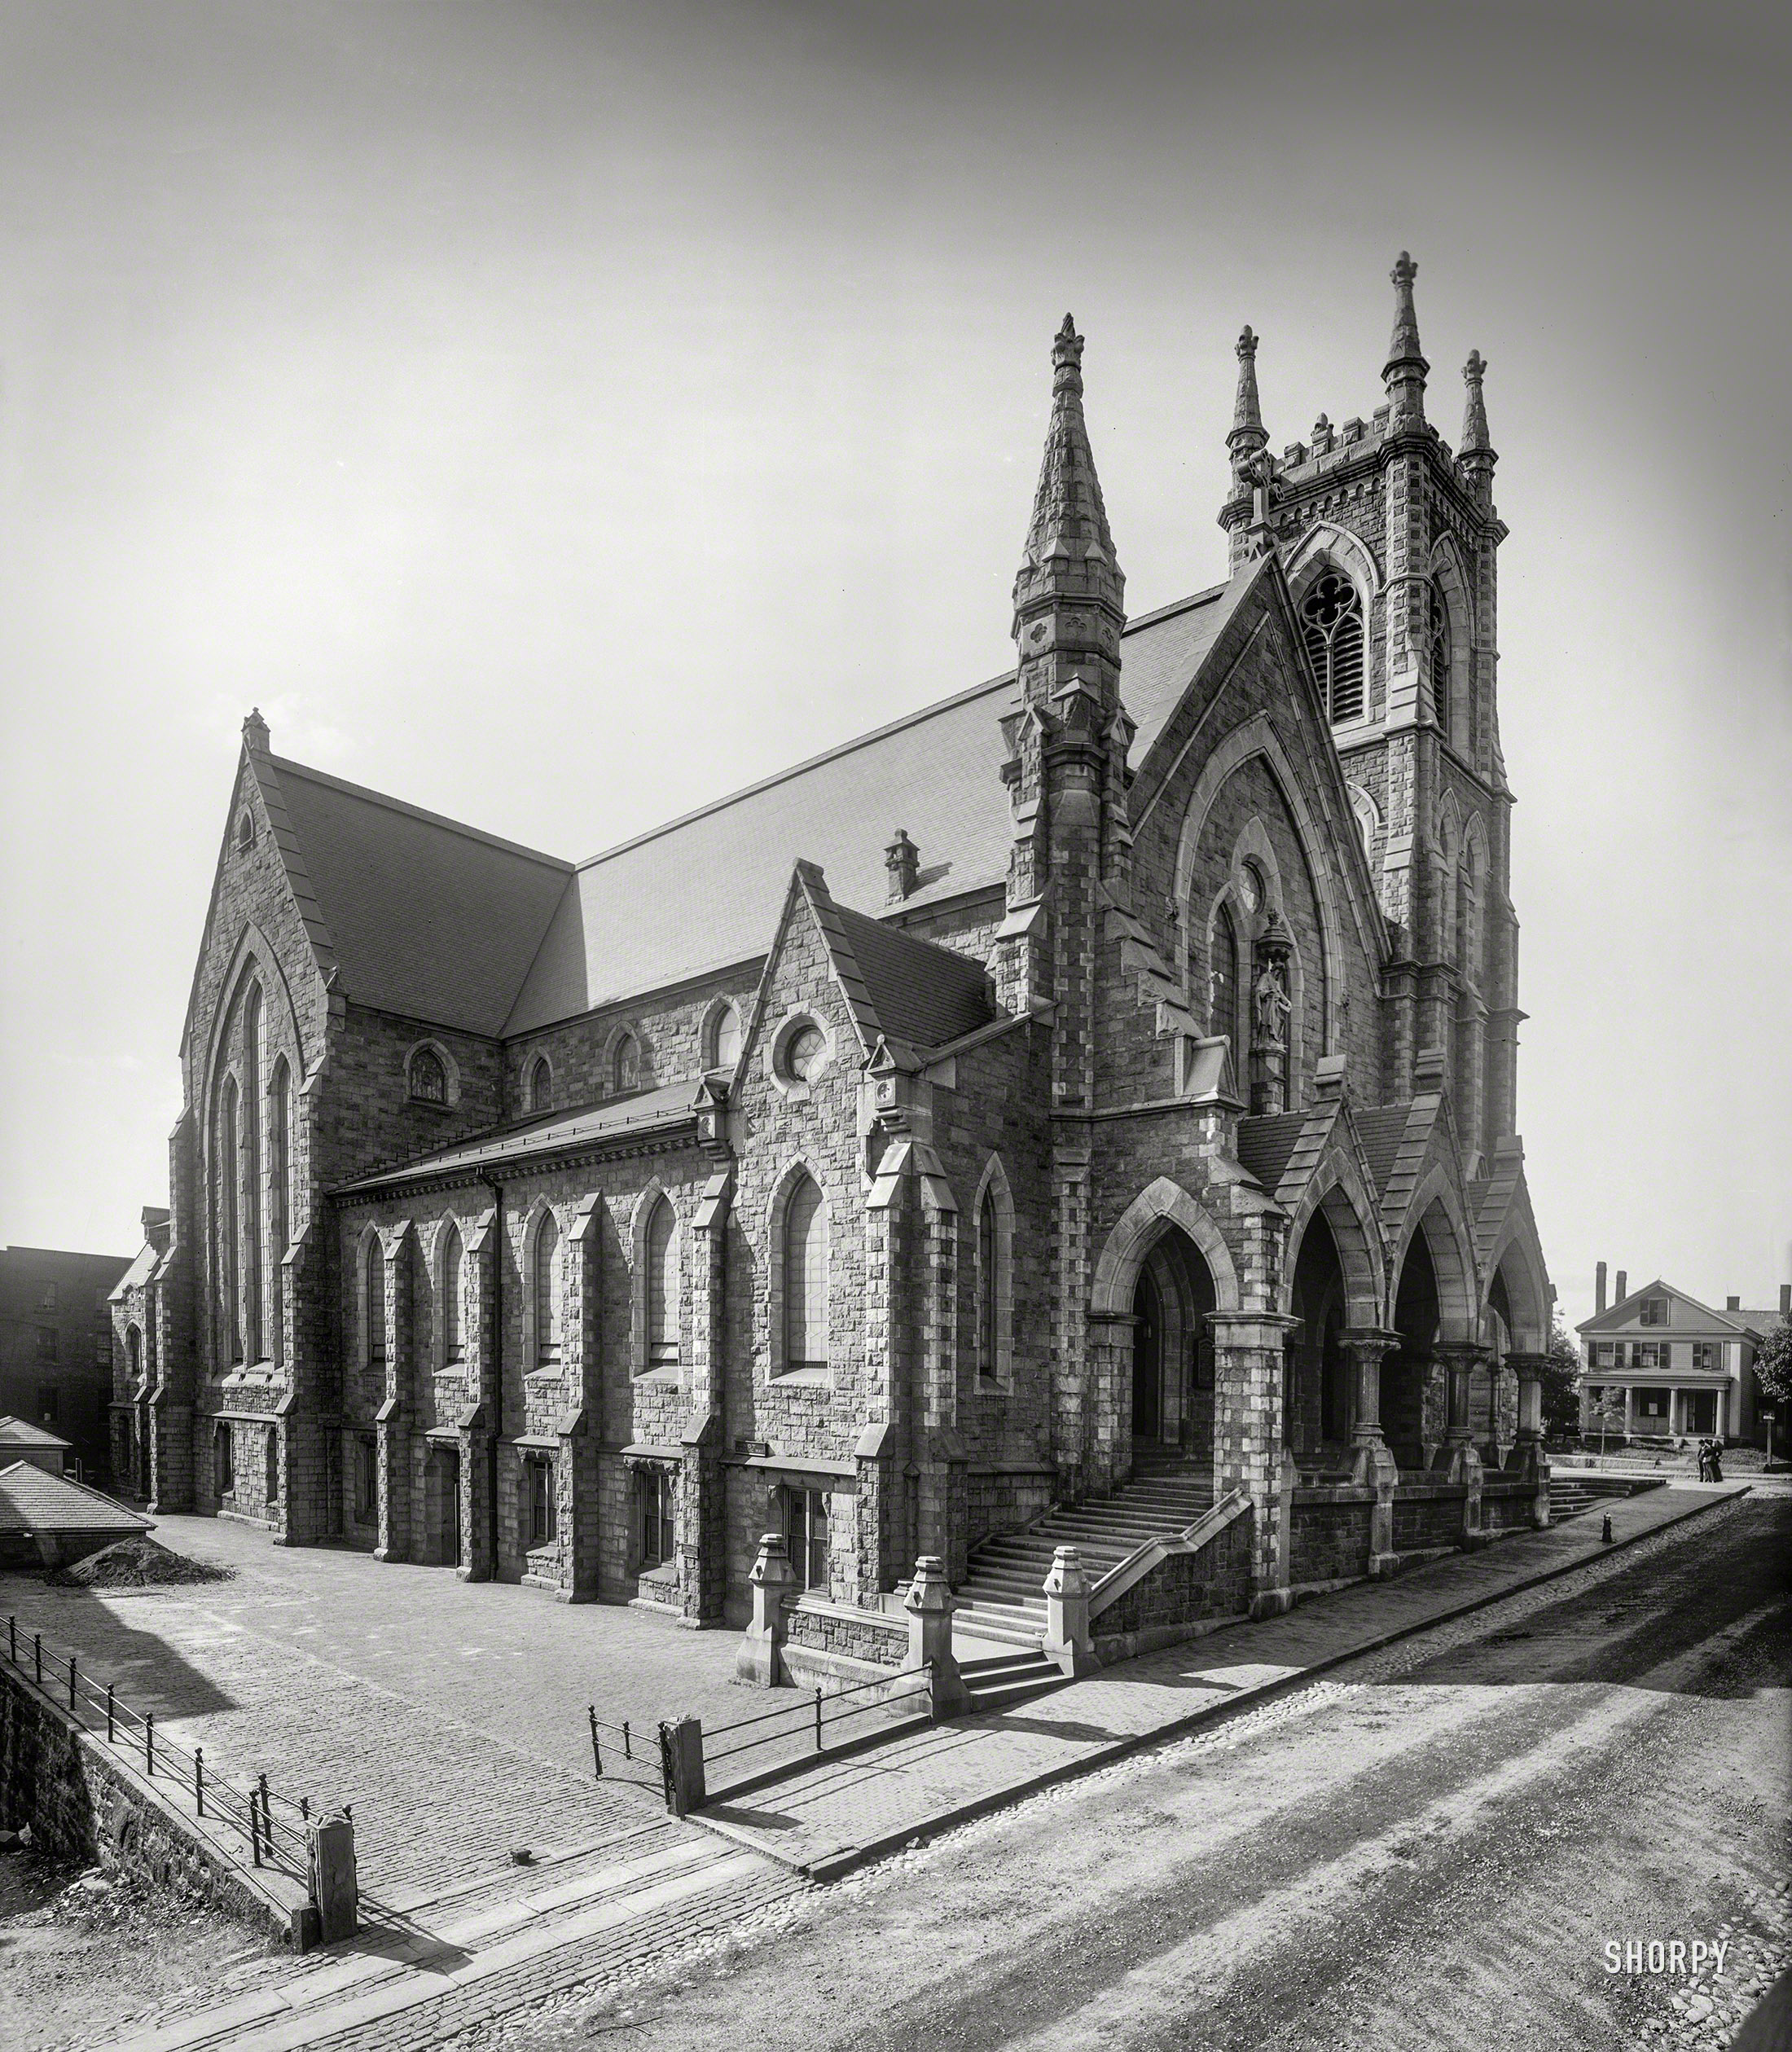 Worcester, Massachusetts, circa 1908. "St. Paul's Church." Now a cathedral. 8x10 inch dry plate glass negative, Detroit Publishing Company. View full size.